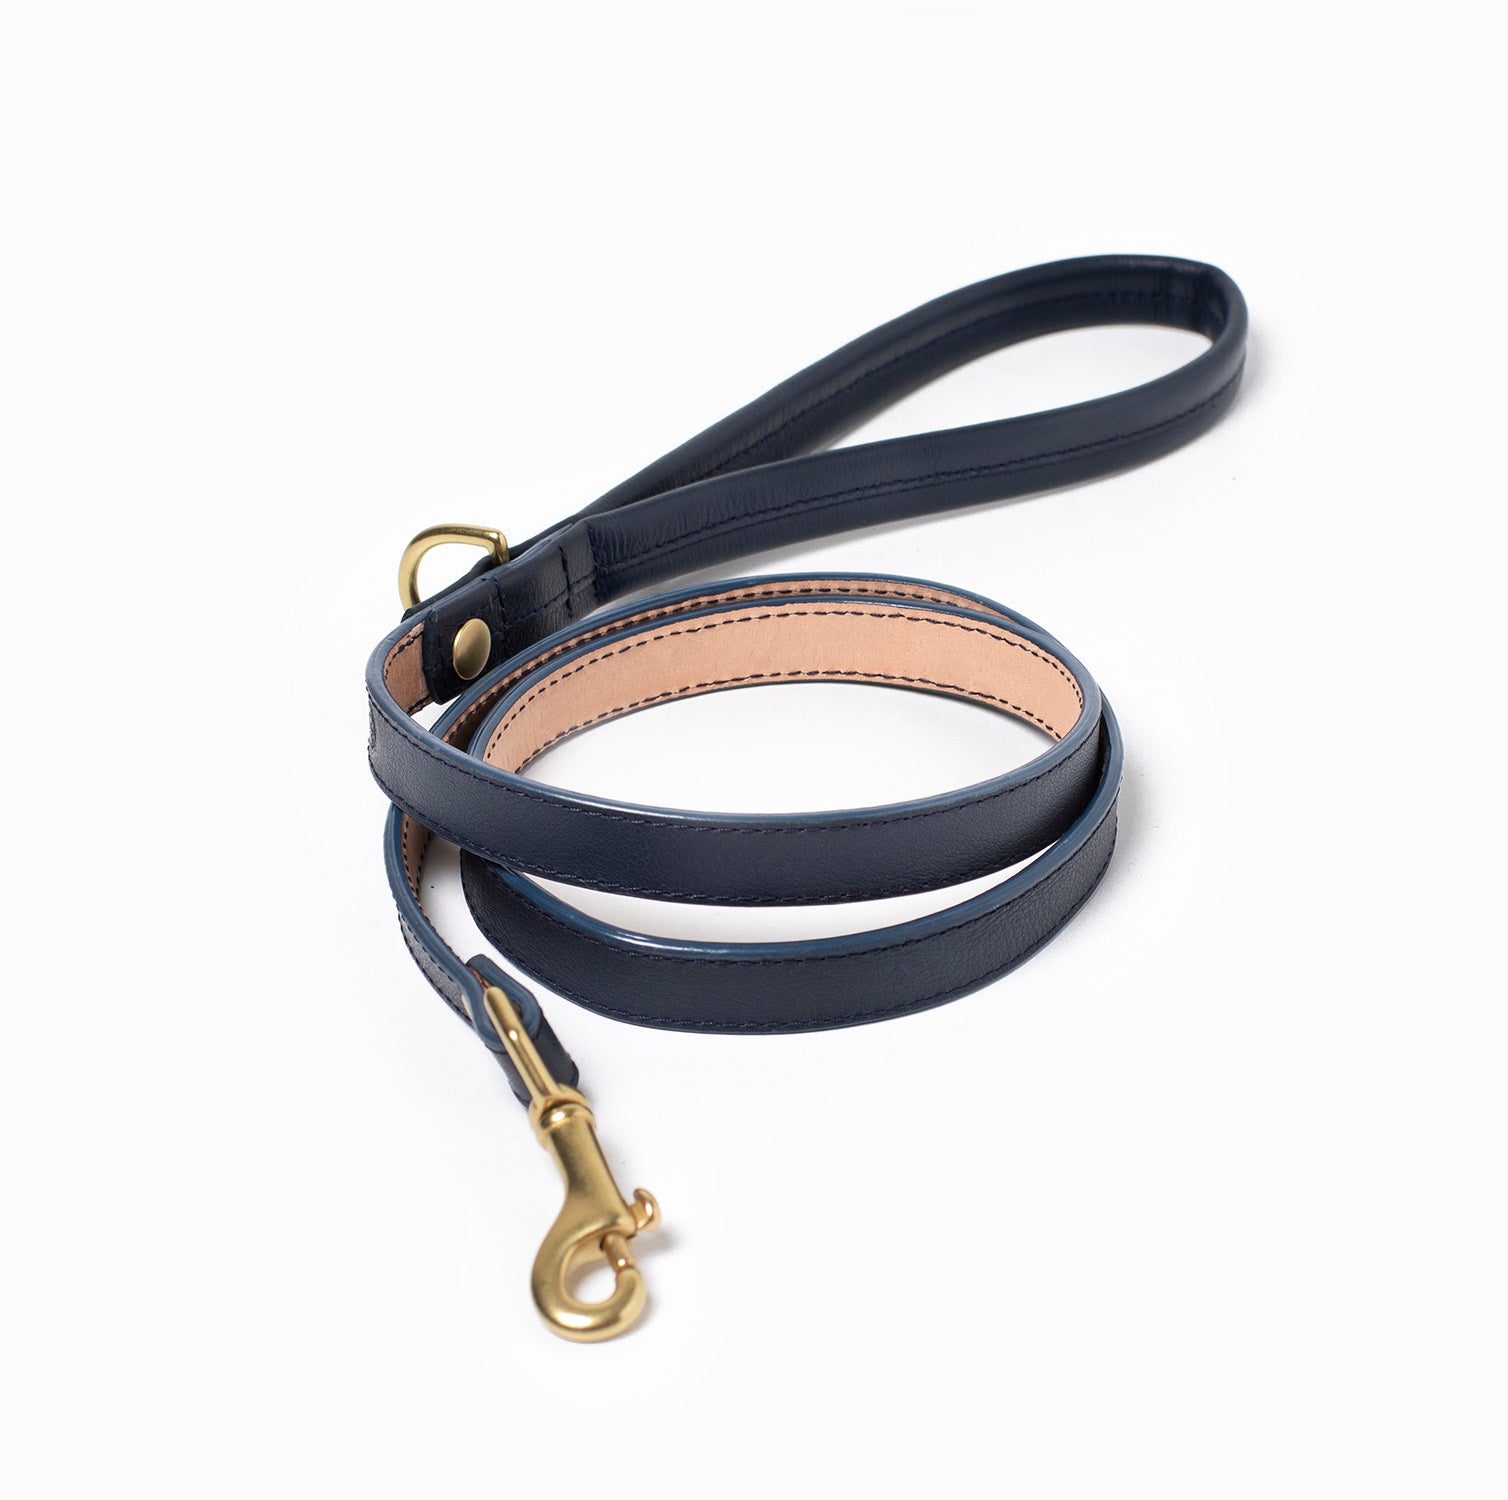 Navy blue leather dog leash with brass hardware